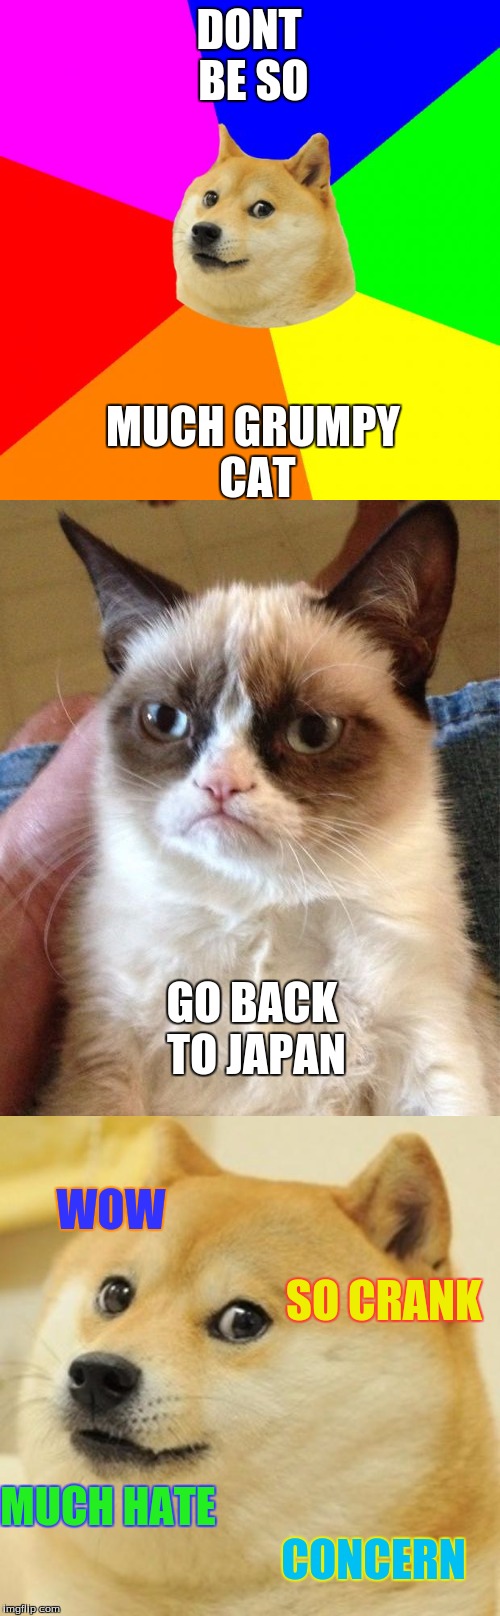 Doge v. Grumpy Cat | DONT BE SO; MUCH GRUMPY CAT; GO BACK TO JAPAN; WOW; SO CRANK; MUCH HATE; CONCERN | image tagged in memes,doge,grumpy cat | made w/ Imgflip meme maker